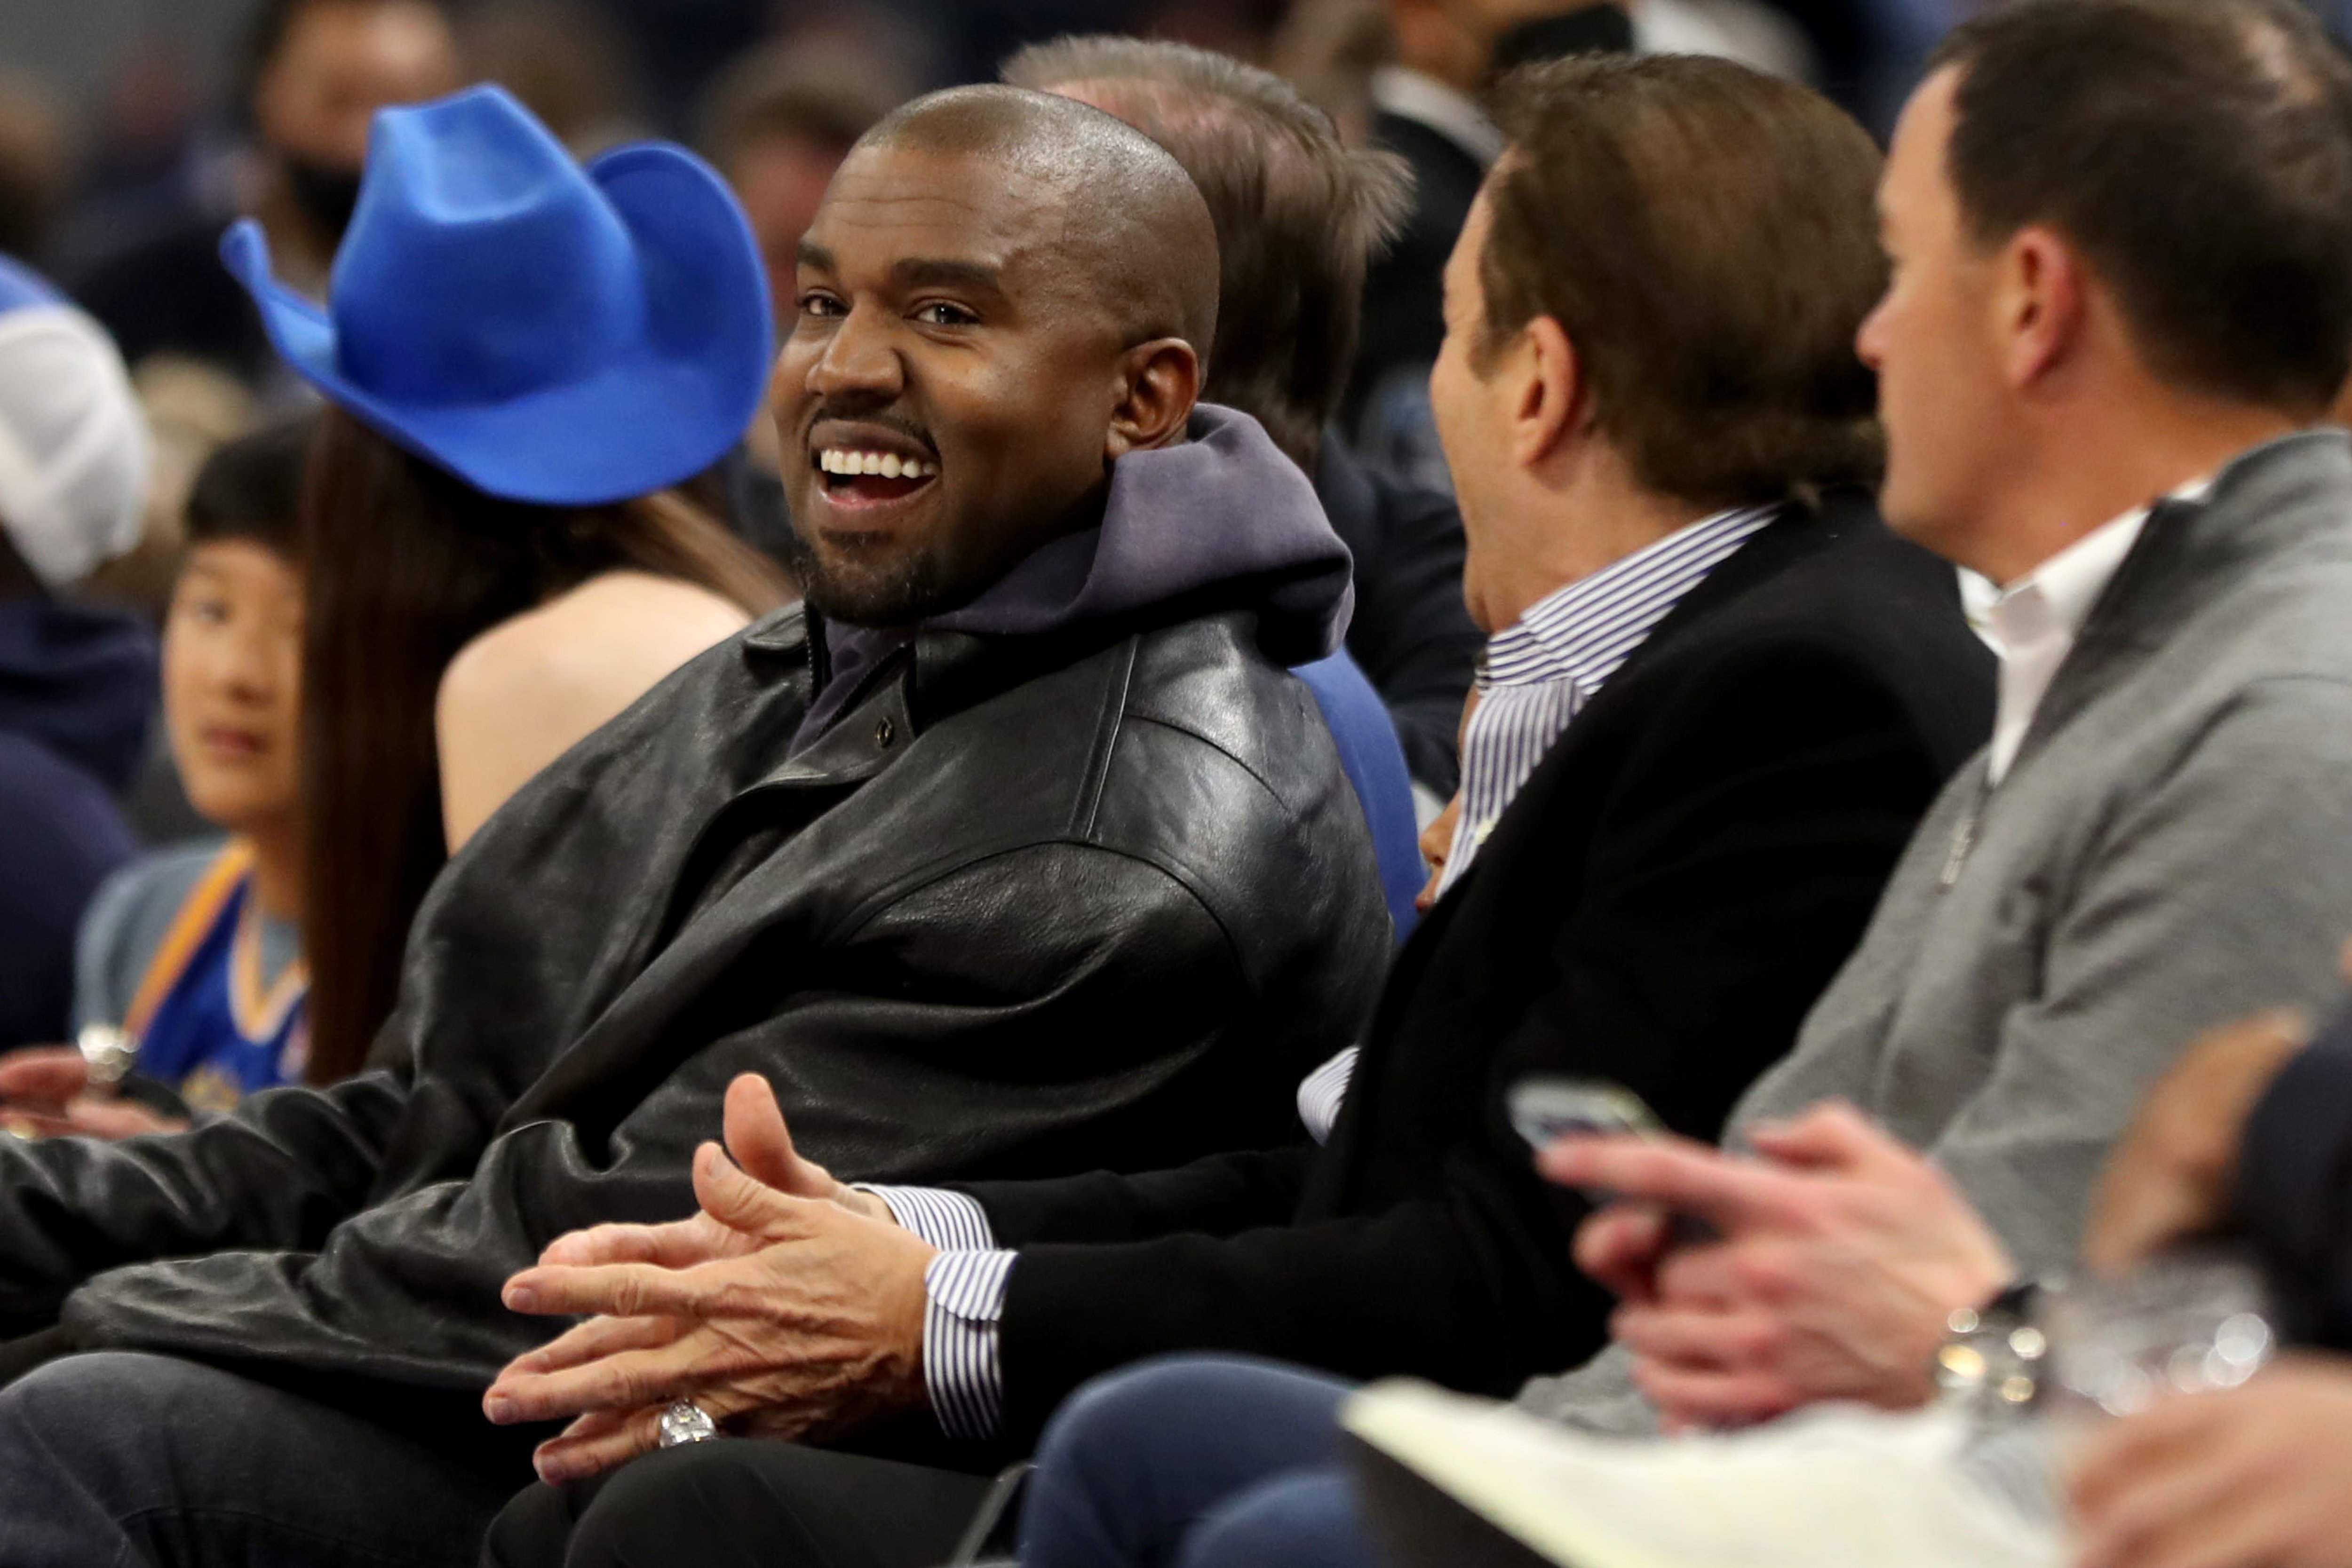 Kanye West at the Golden State Warriors vs. Boston Celtics game on Wednesday, March 16, 2022 | Source: Getty Images